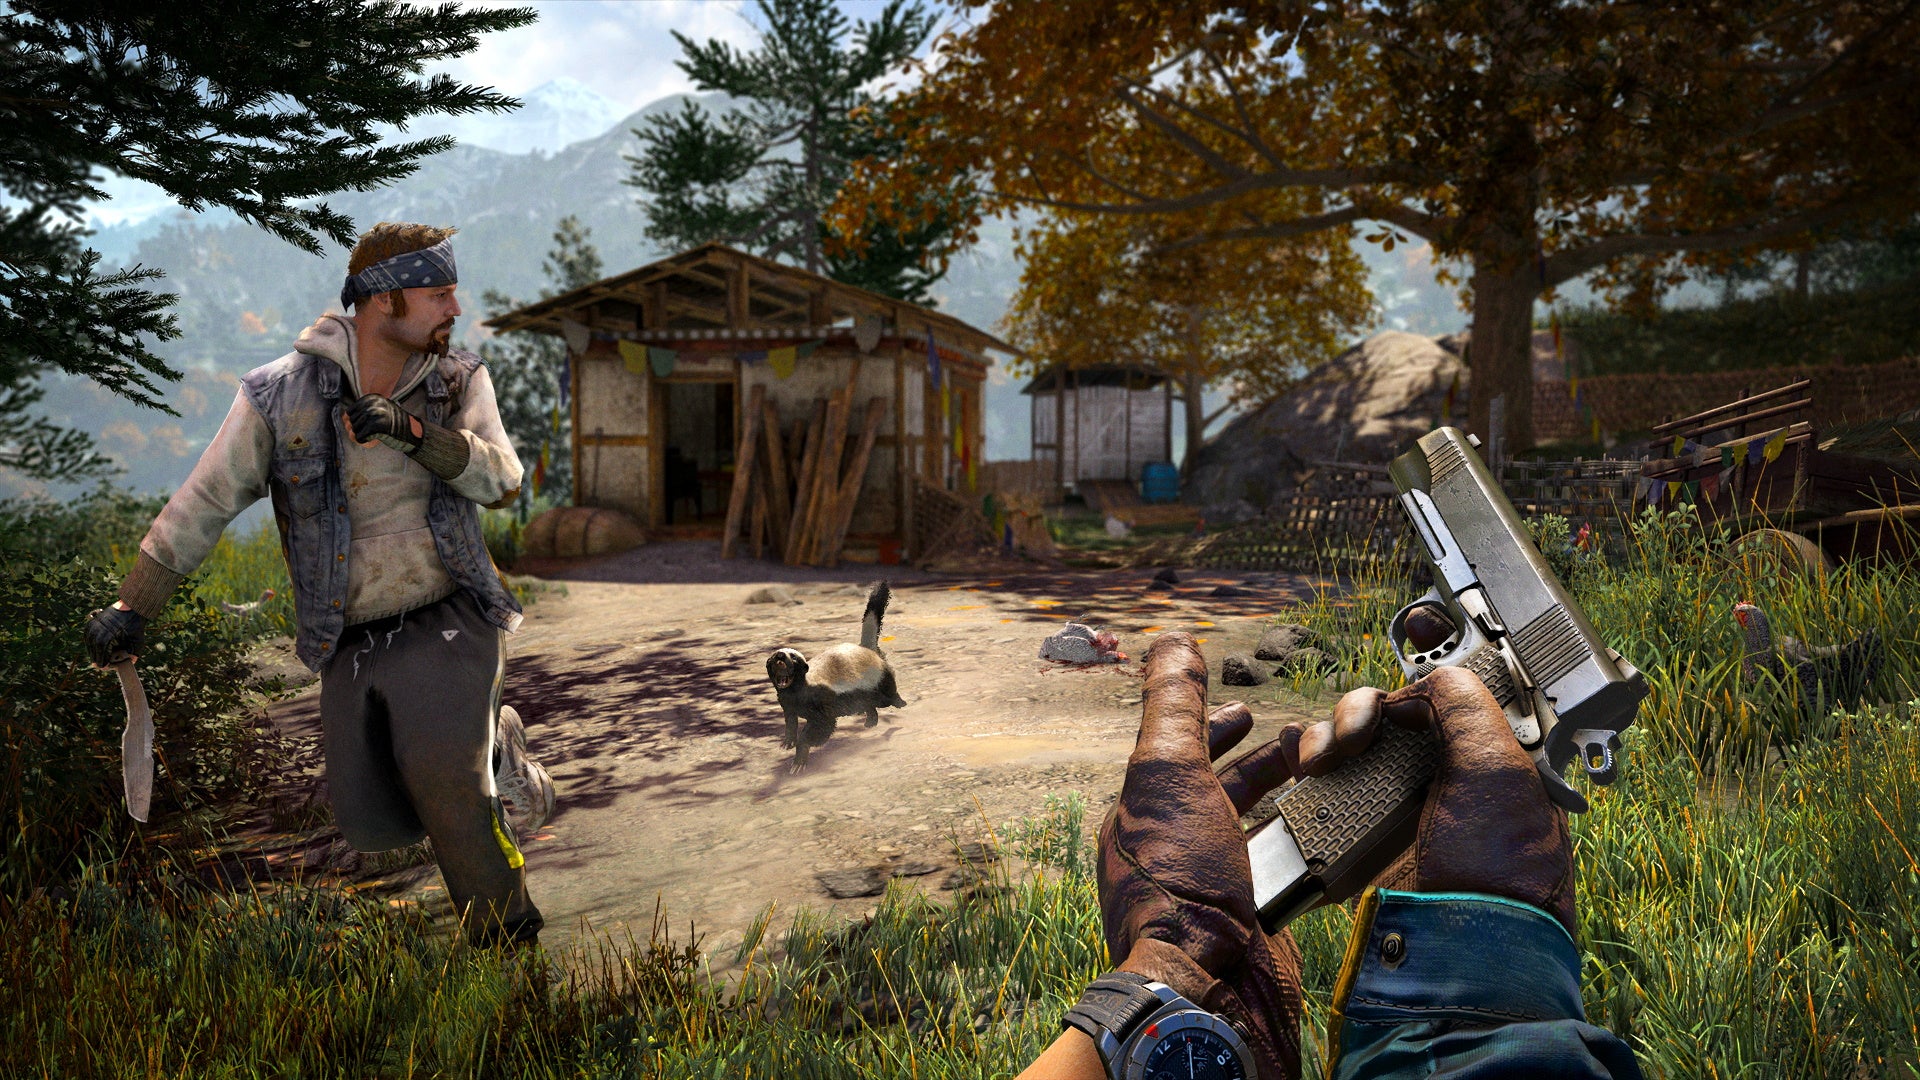 An image from Far Cry 4 which shows one player reloading, while another runs from an angry honey badger.